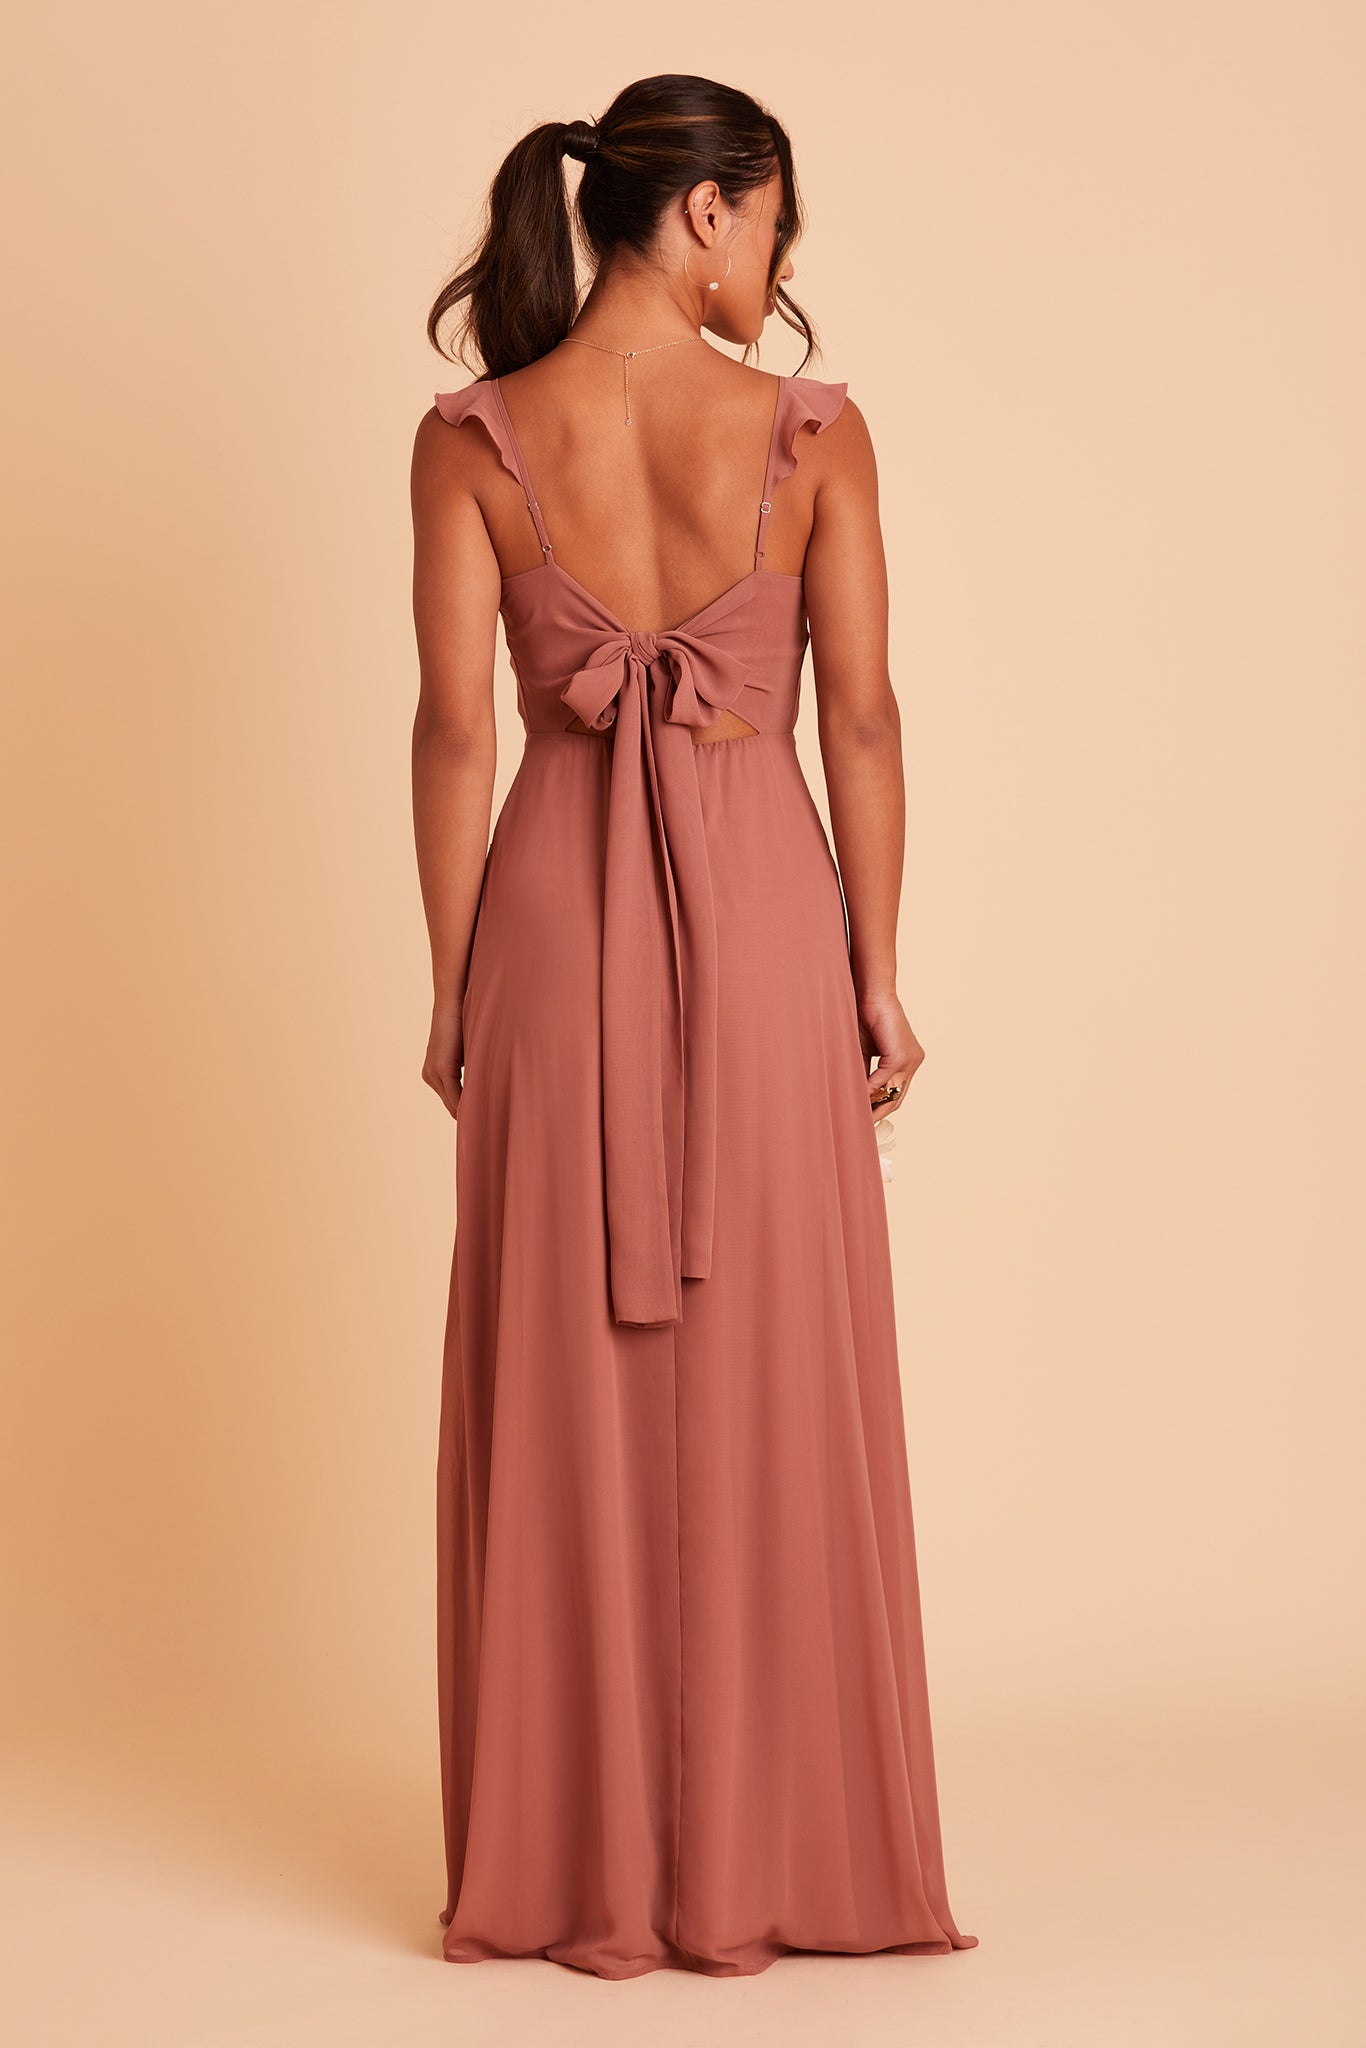 Doris bridesmaid dress with slit in desert rose chiffon by Birdy Grey, back view